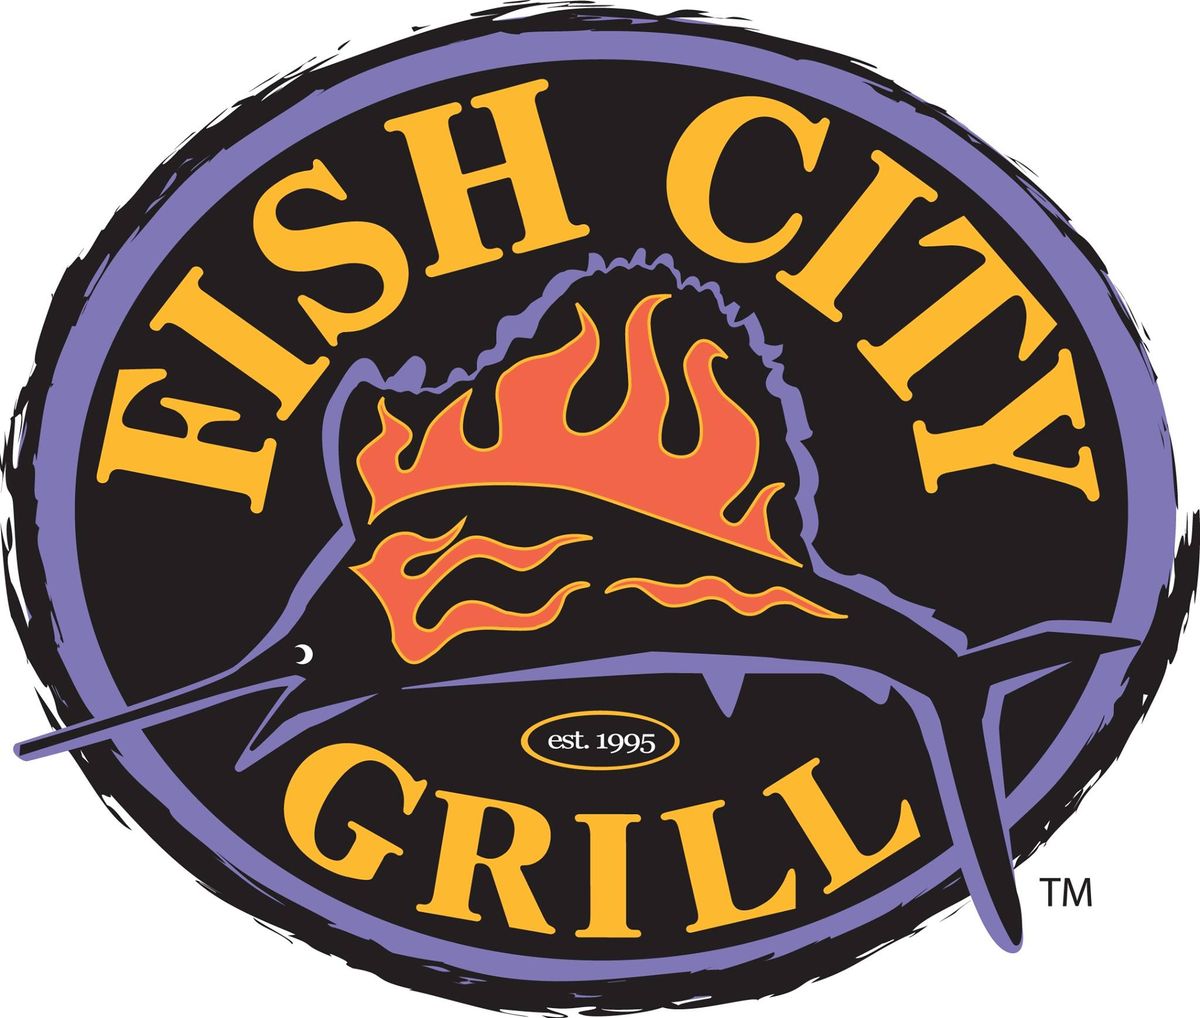 Fish City Grill Pearland has teamed up with Snowdrop Foundation